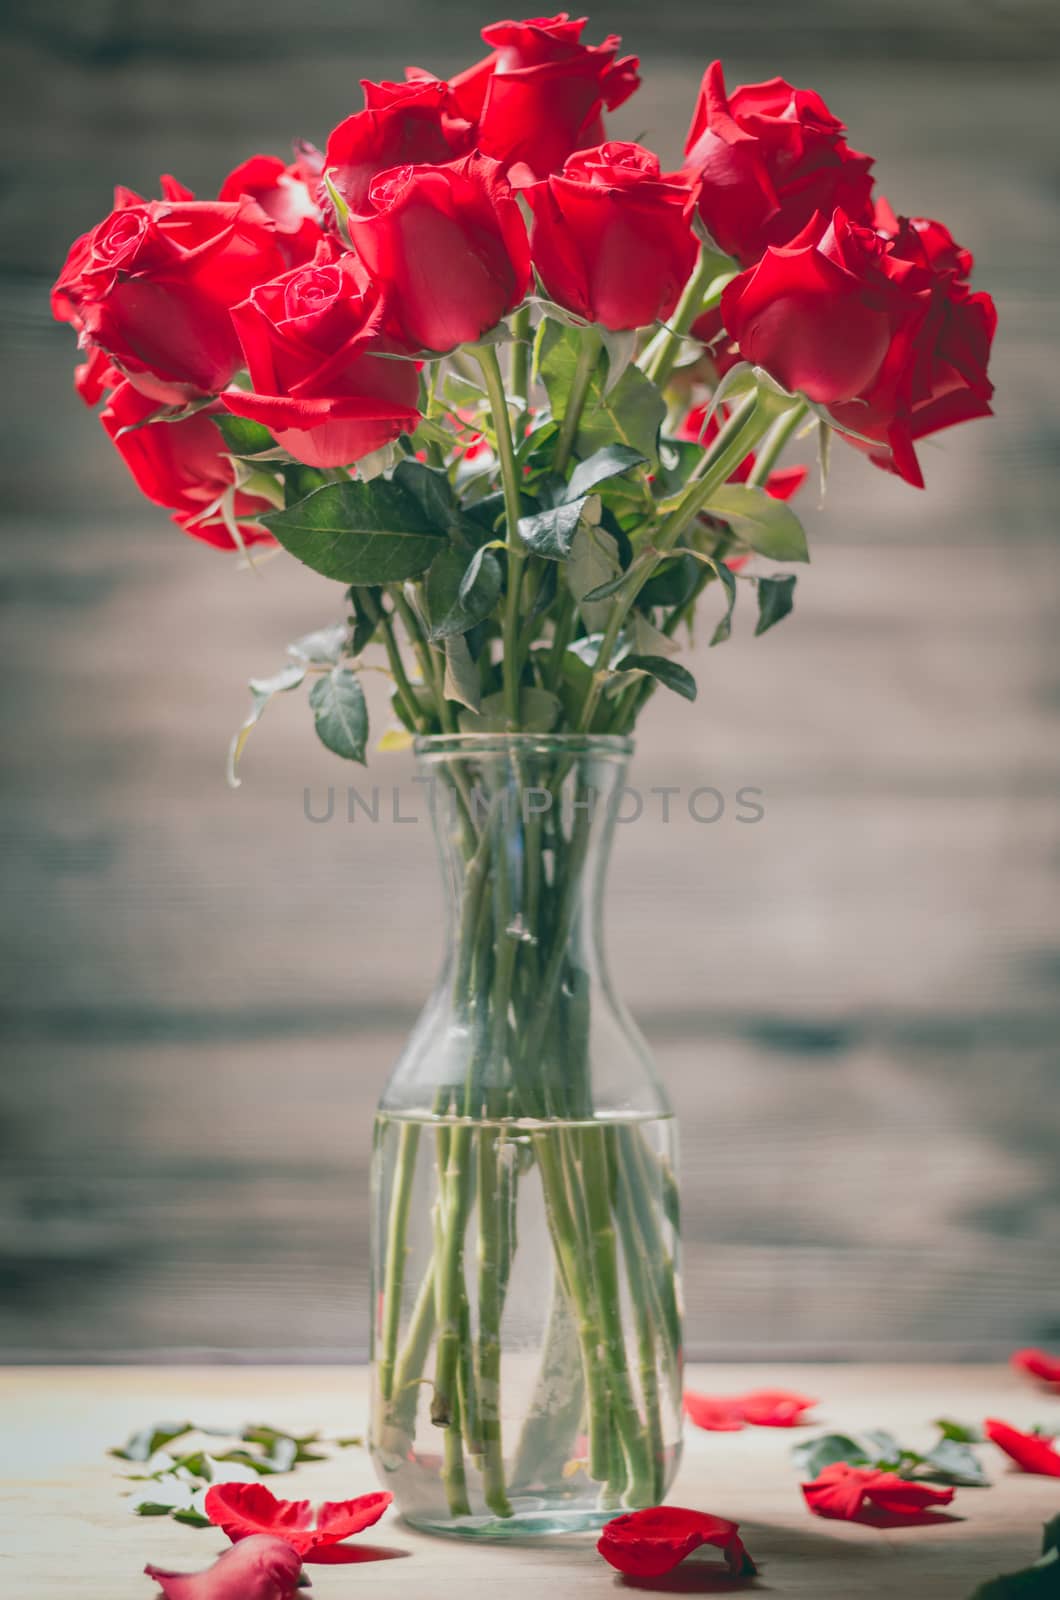 Valentines Day of Red rose in vase on wooden background